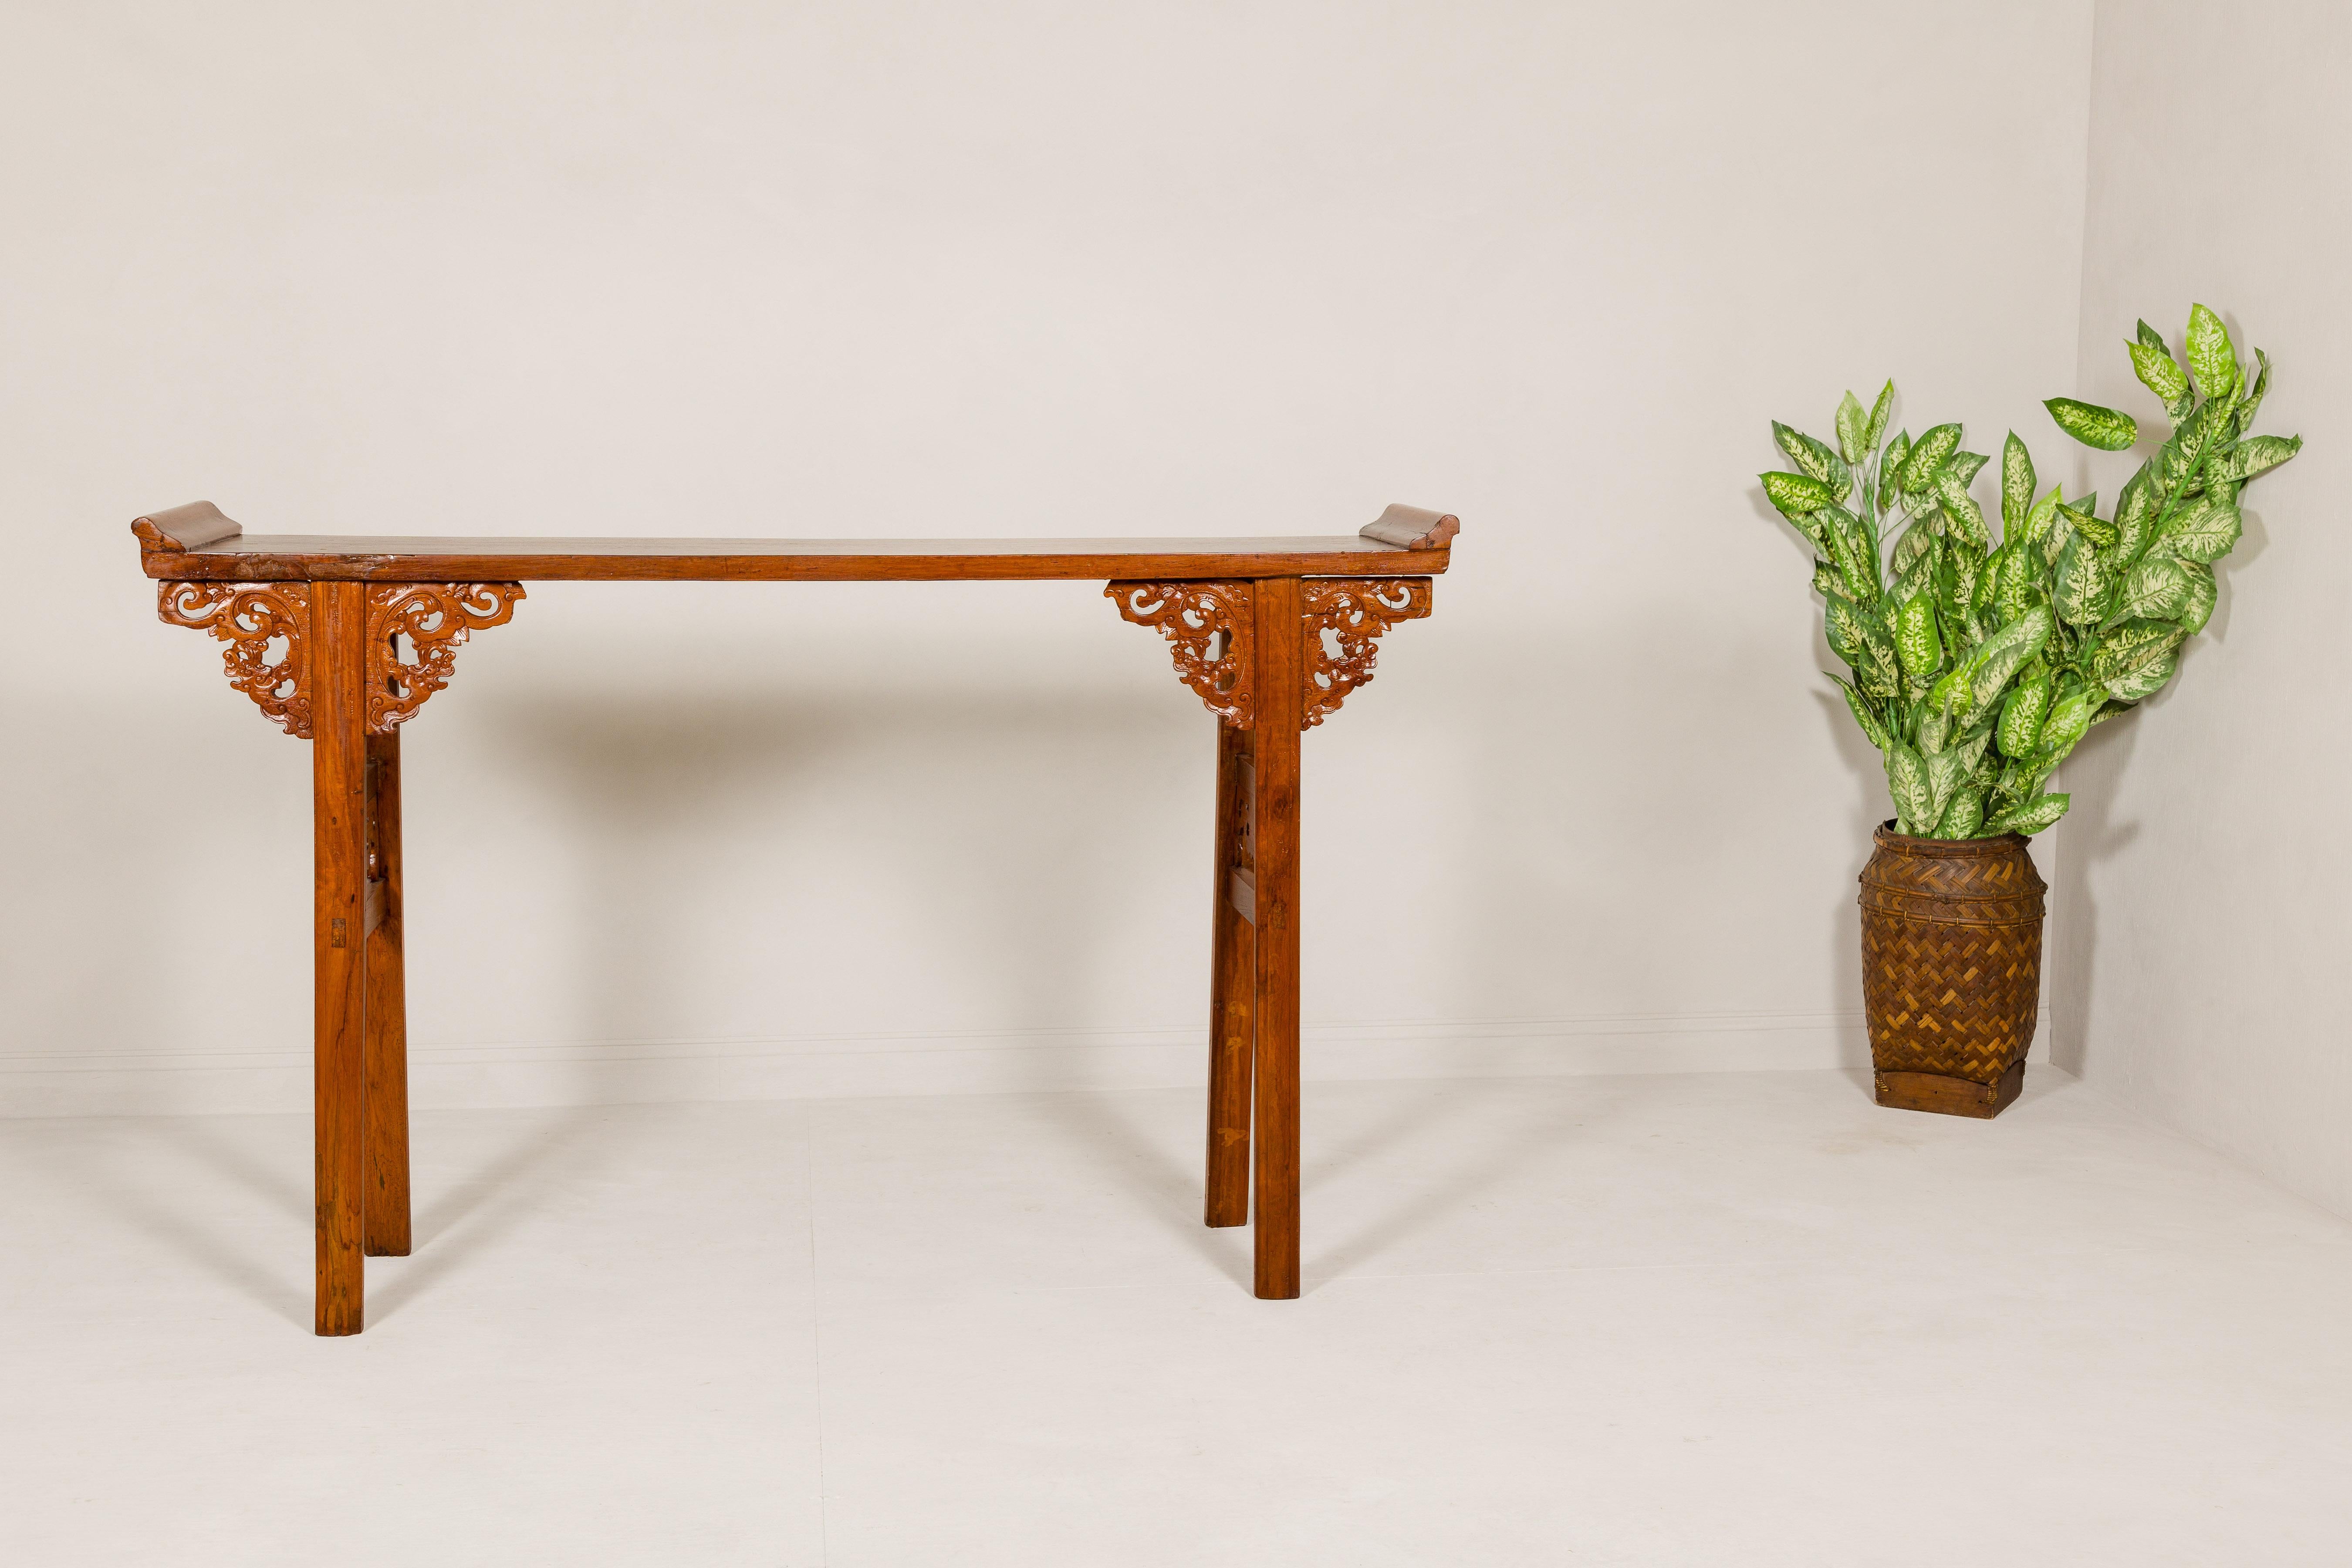 Qing Dynasty Tall Altar Console Table with Carved Scrolling Spandrels In Good Condition For Sale In Yonkers, NY